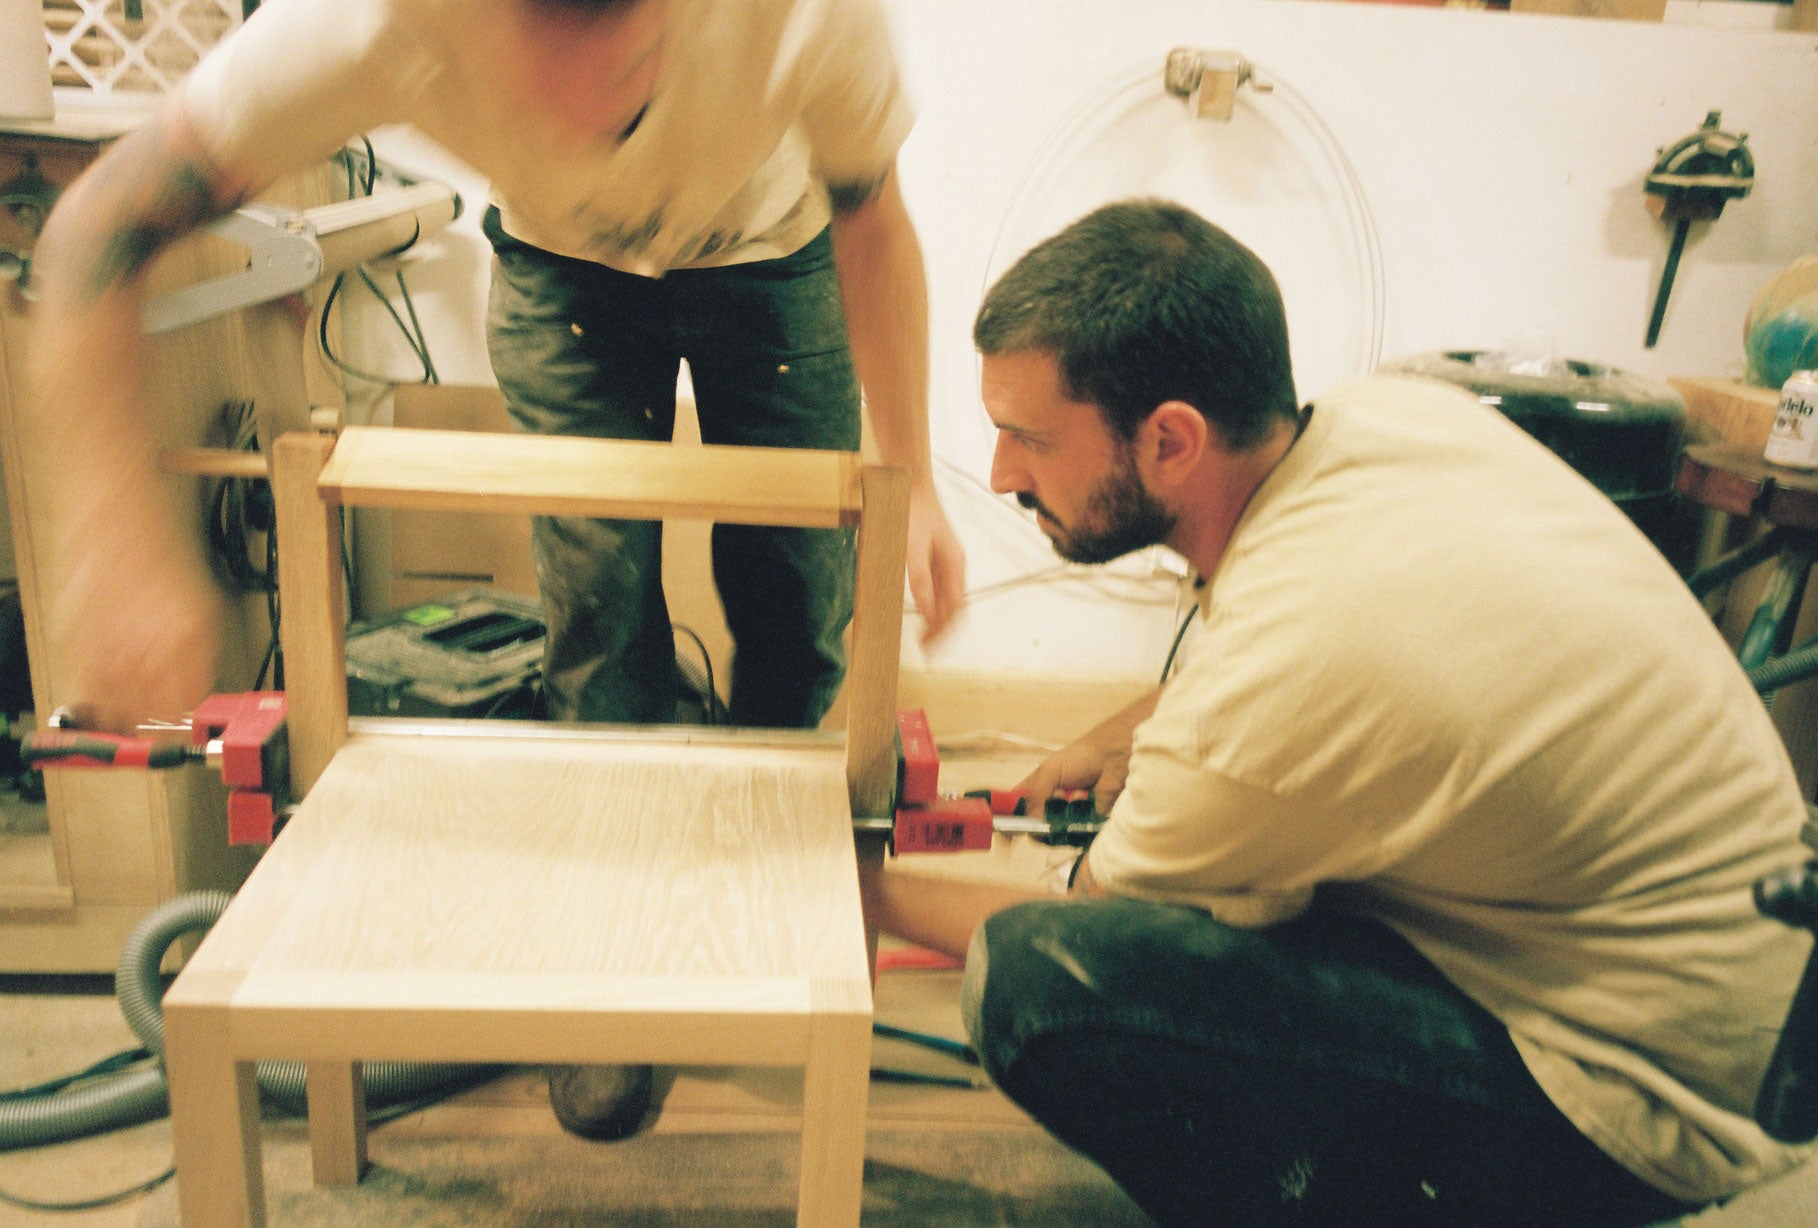 Two people assemble the Anything Chair in the workshop.